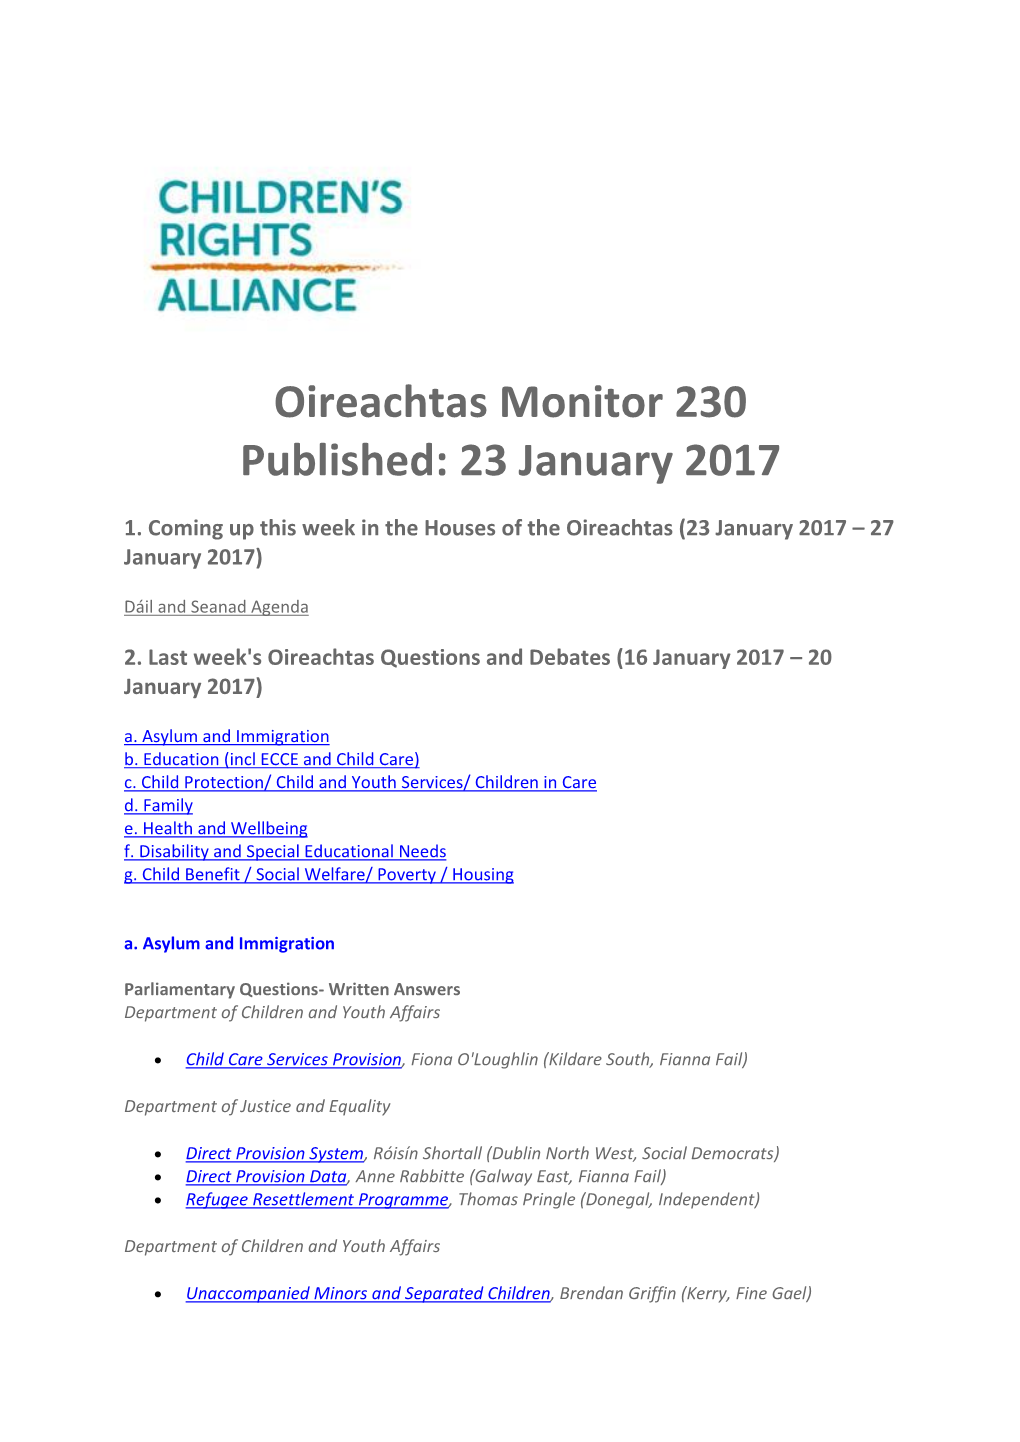 Oireachtas Monitor 230 Published: 23 January 2017